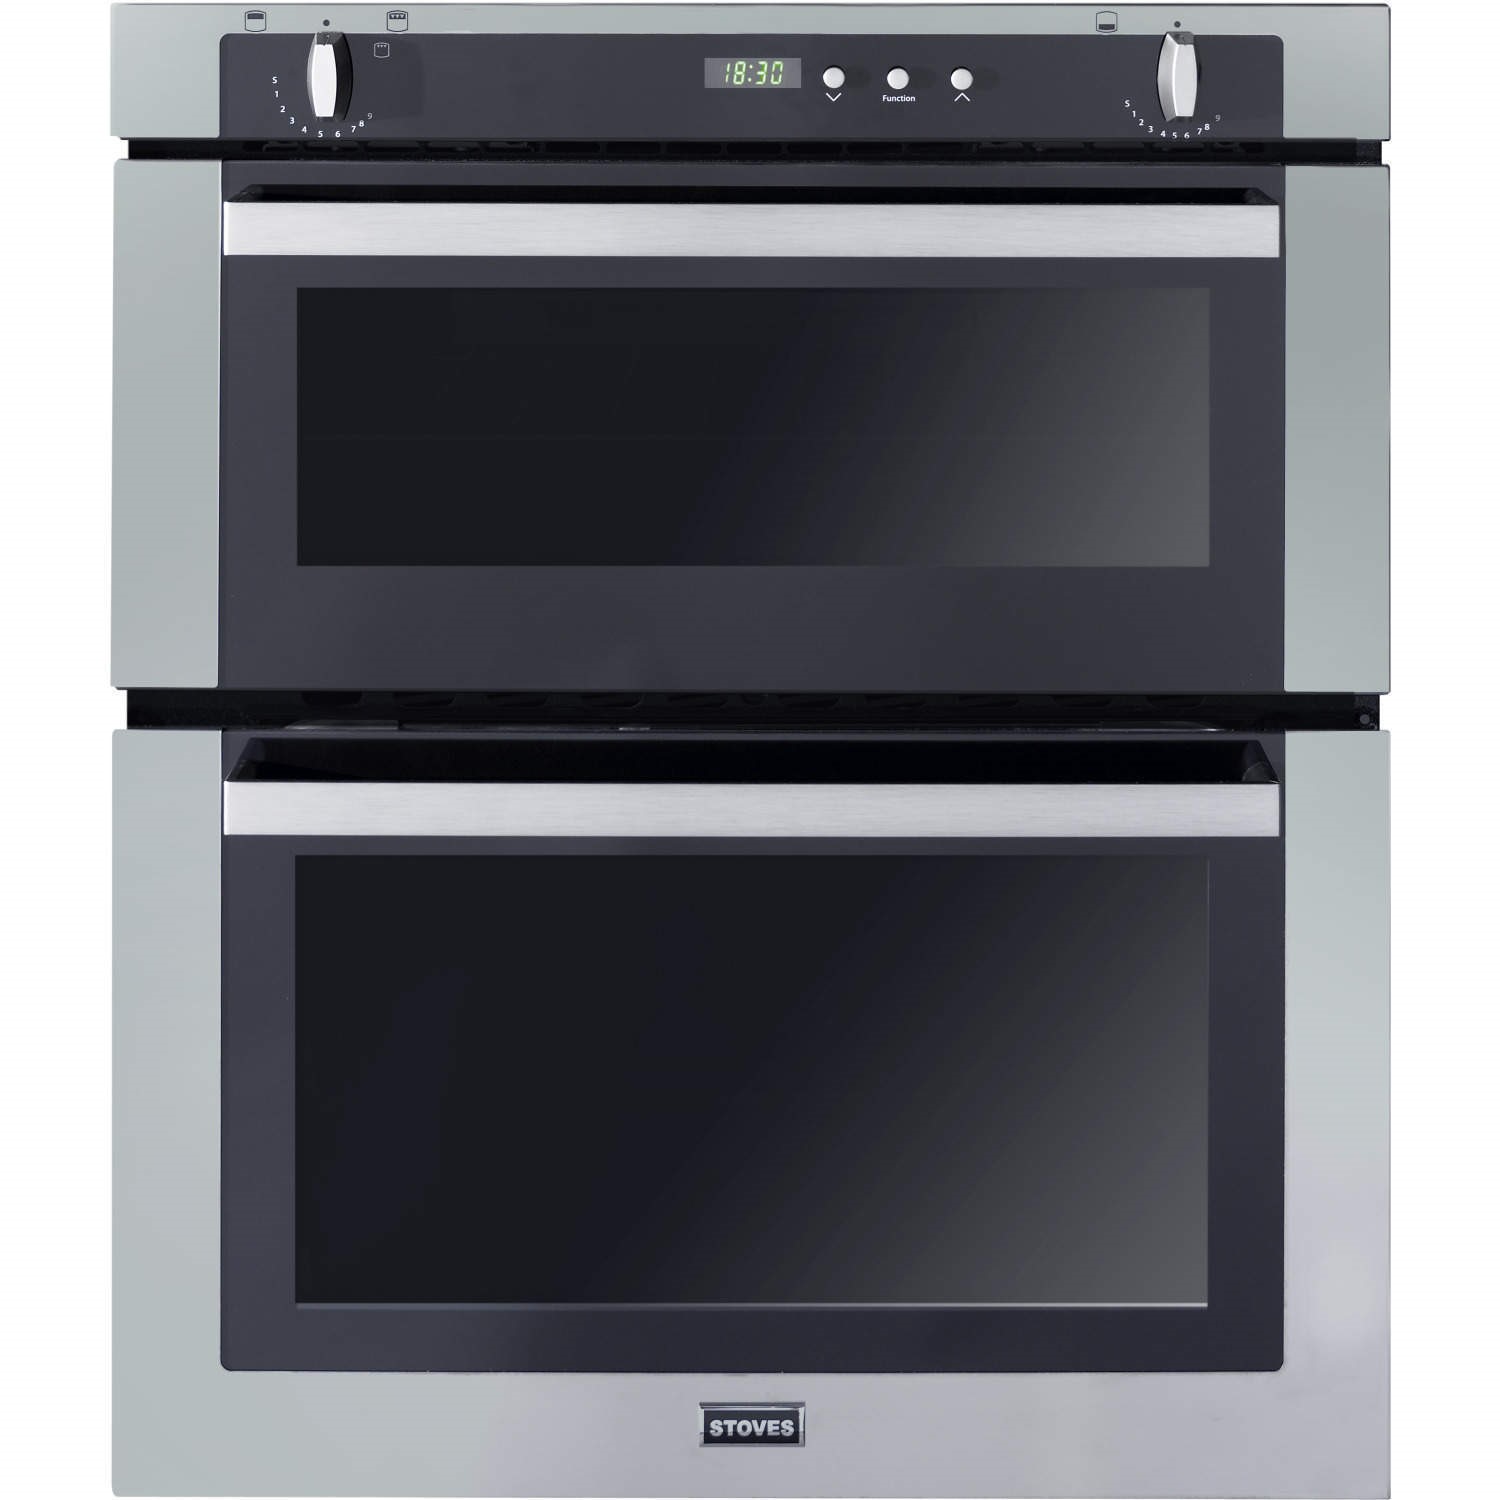 Stoves SGB700PS Built Under Gas Double Oven - Stainless Steel